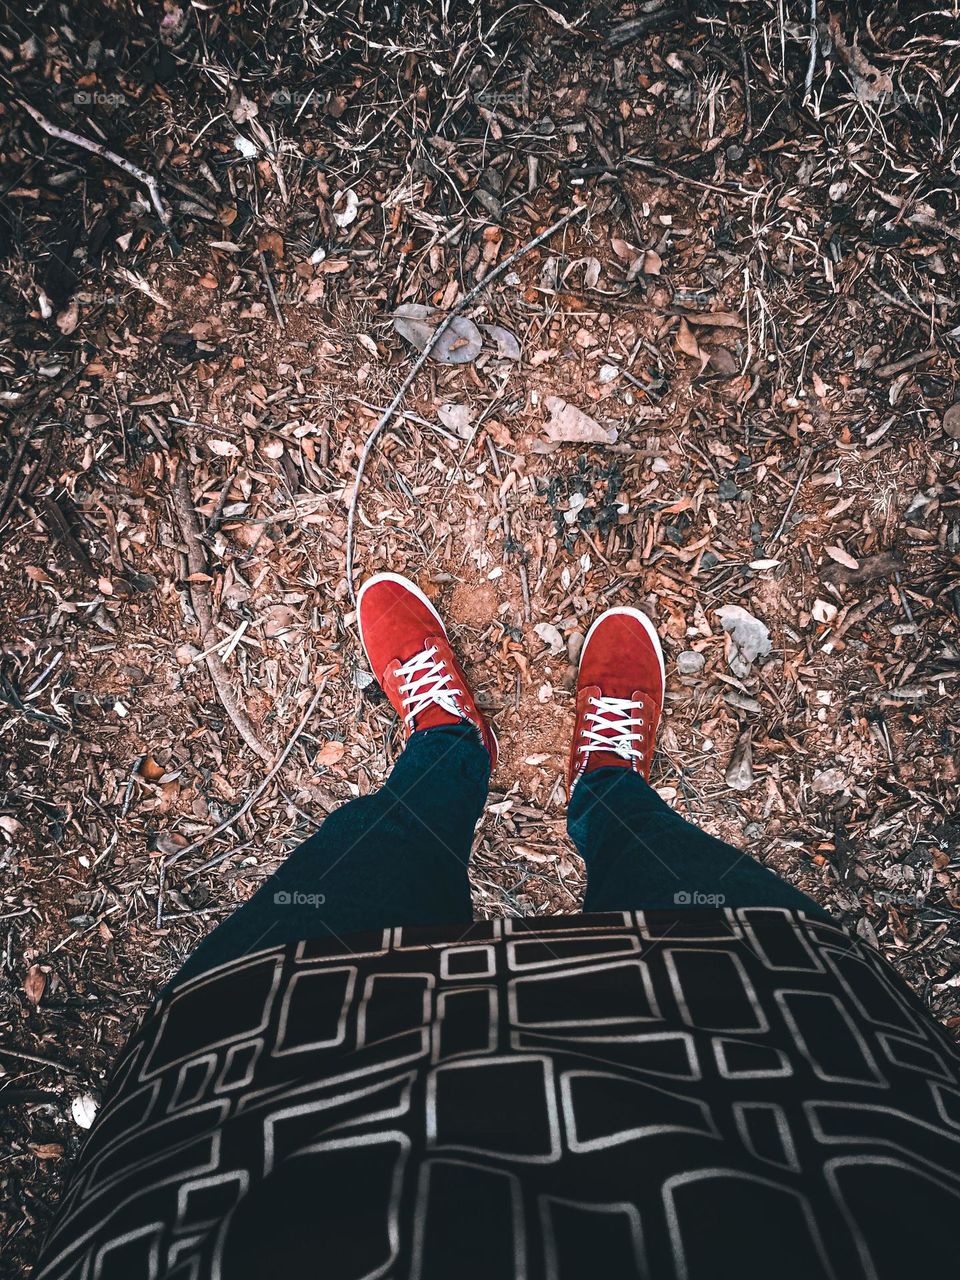 sneakers | Shoes | Red | Aesthetic